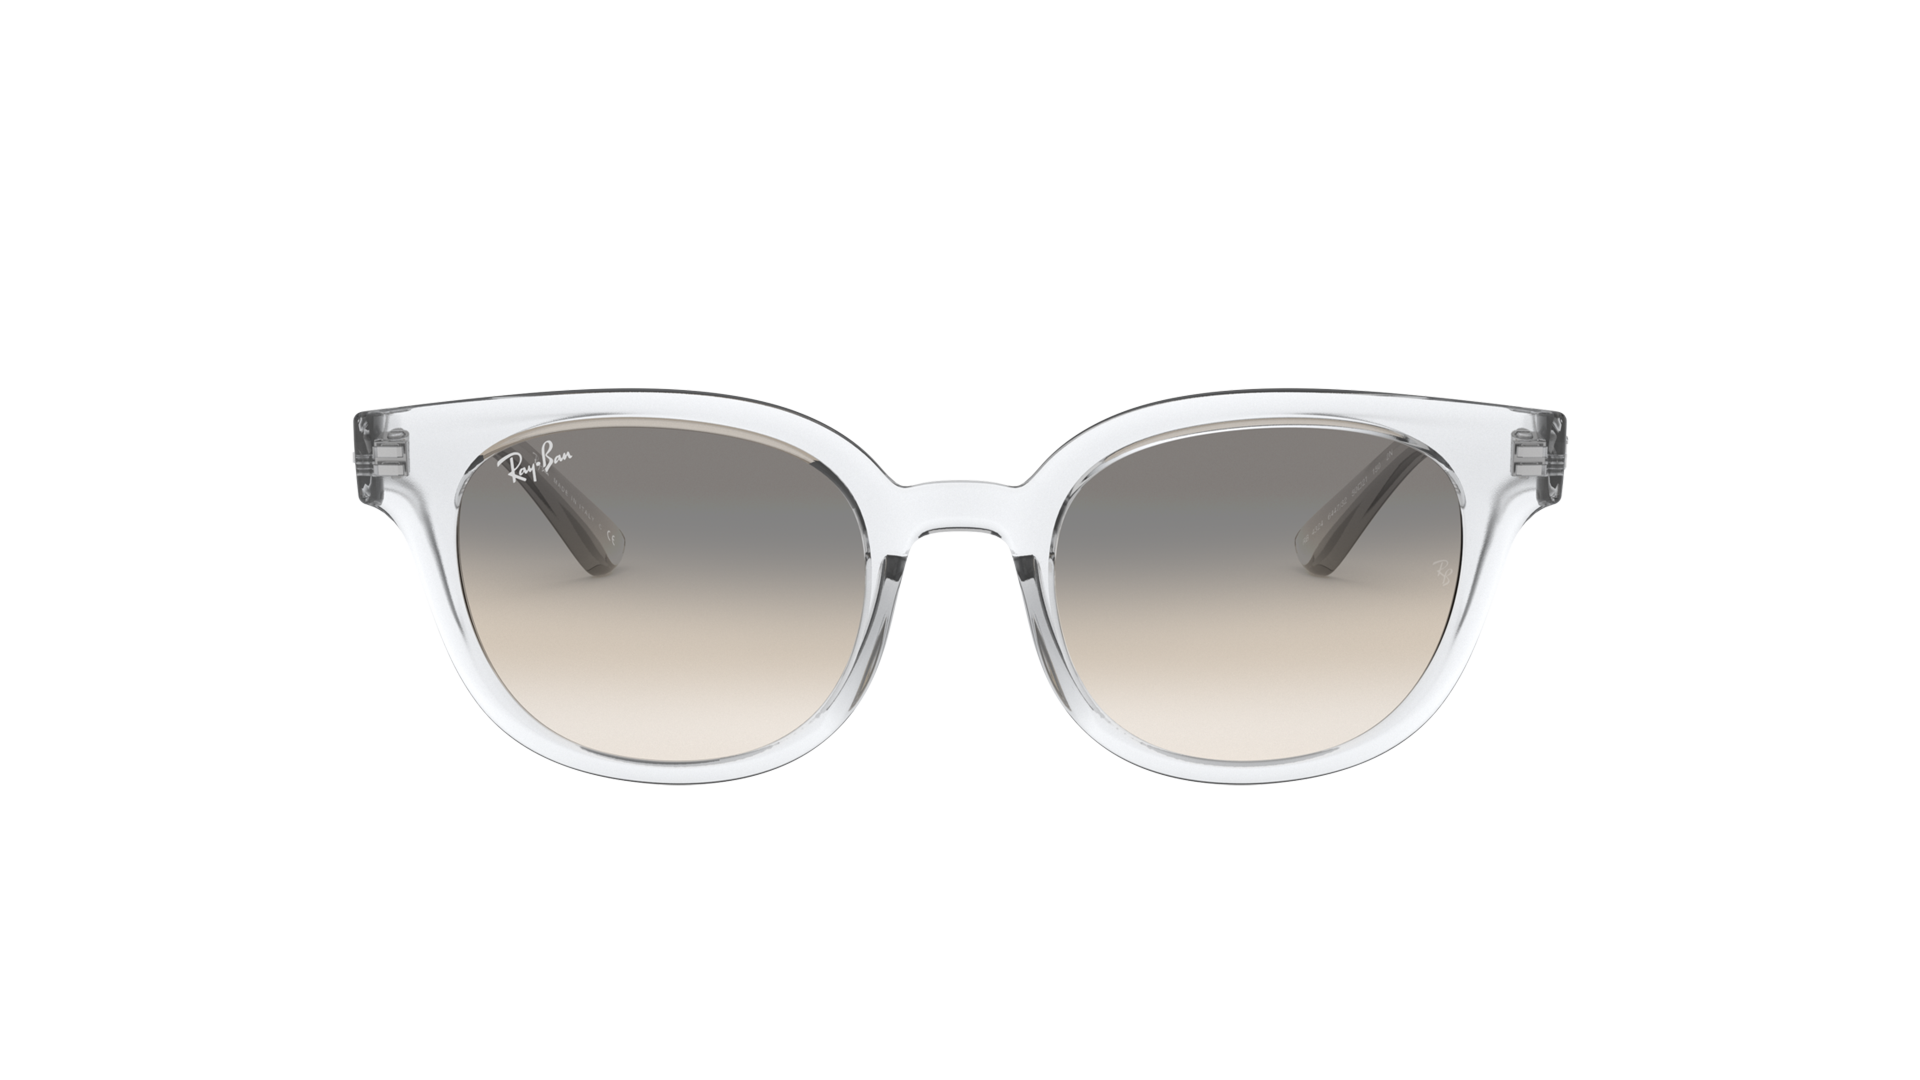 Ray Ban Rb4324 6447 32 50 21 Clear Gradient Visiofactory